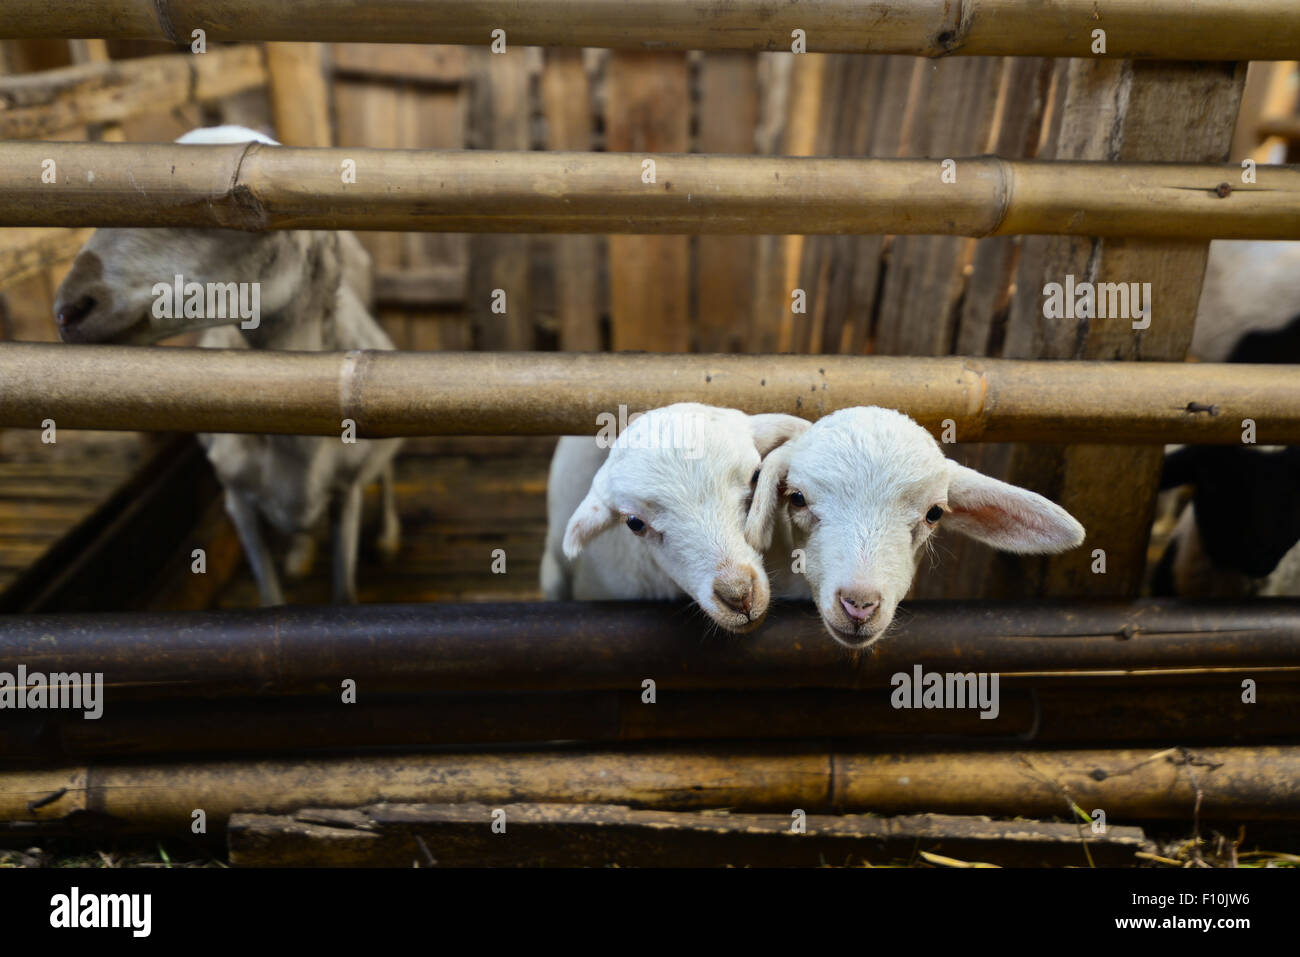 Goats at a community farm developed as an alternative source of income for farmers-villagers in Pacet, Cianjur, West Java, Indonesia. Stock Photo